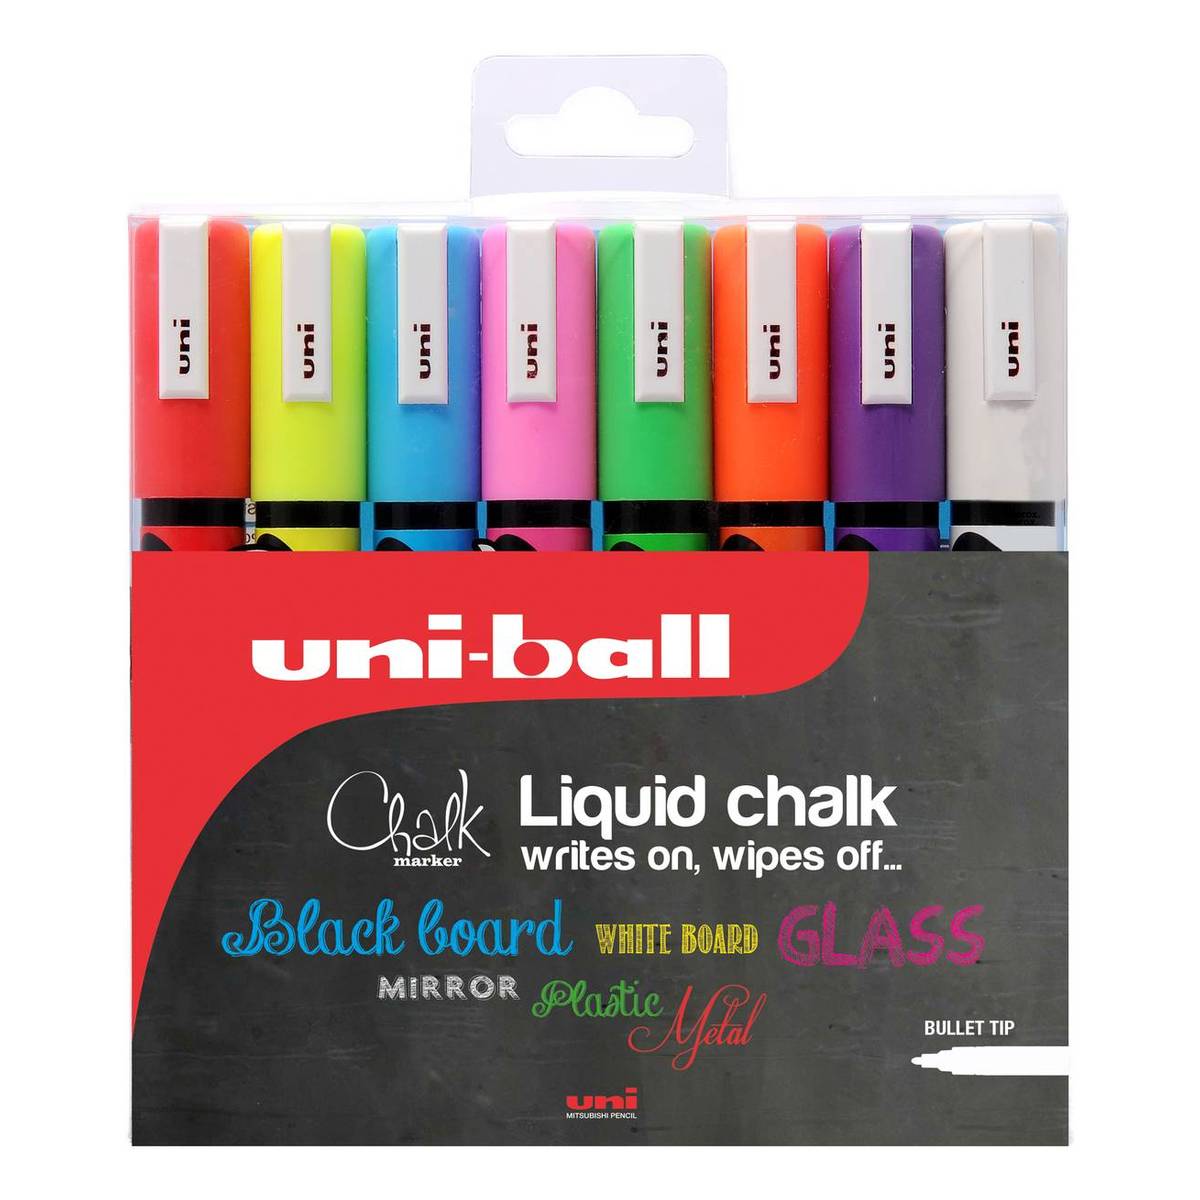 How to Use Liquid Chalk Markers - Life of Colour